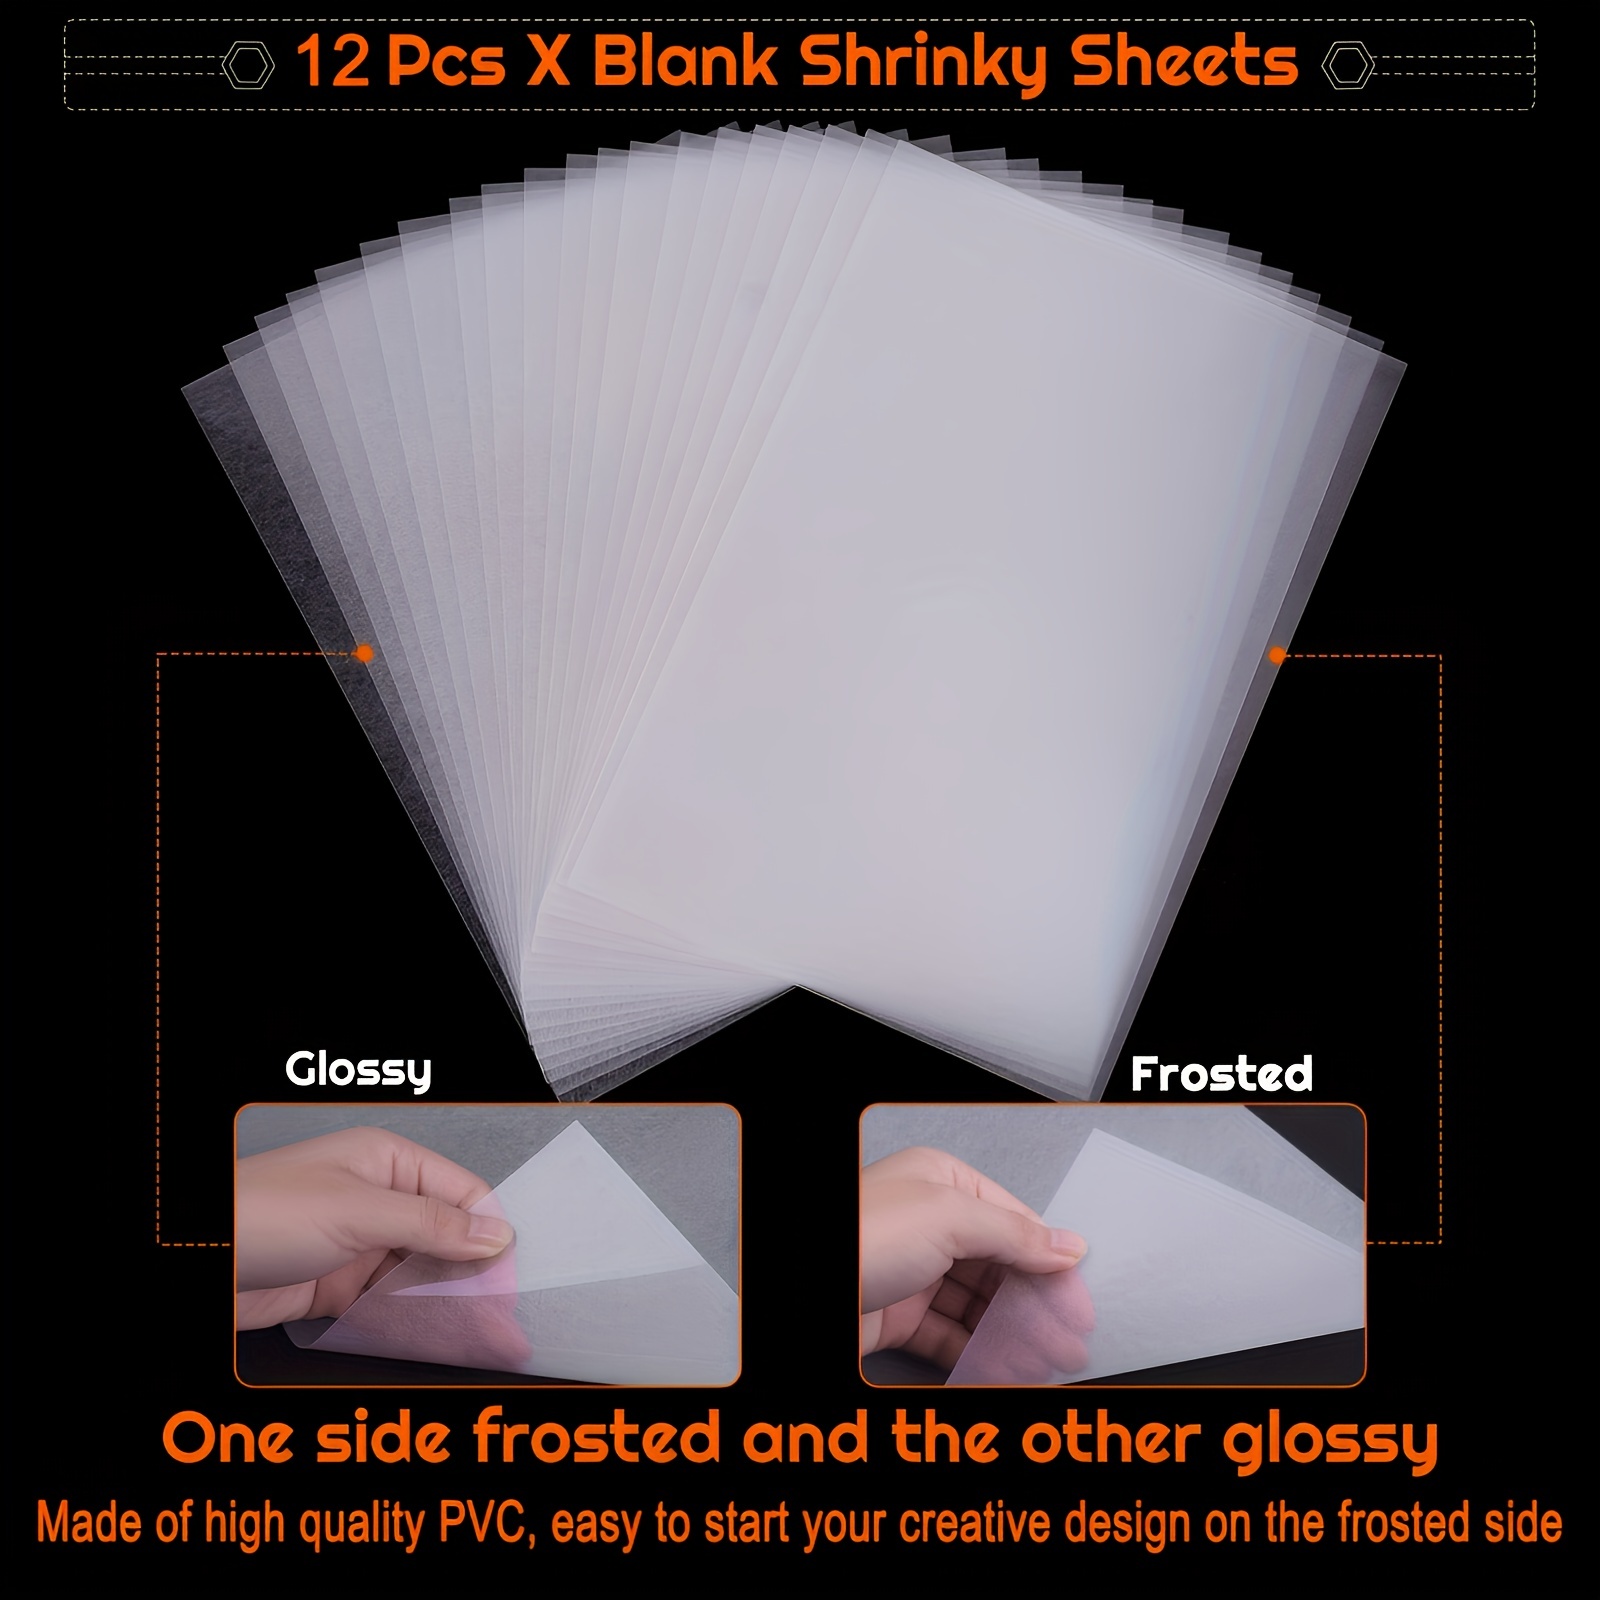 Shrink Plastic Sheet Kit for Shrinky Dink, 175 Pcs Heat Shrinky Art Crafts  Set, Include 20Pcs Blank Shrink Art Film Paper and 155 Accessories for Kids  Creative Art Craft DIY Ornaments Keychains